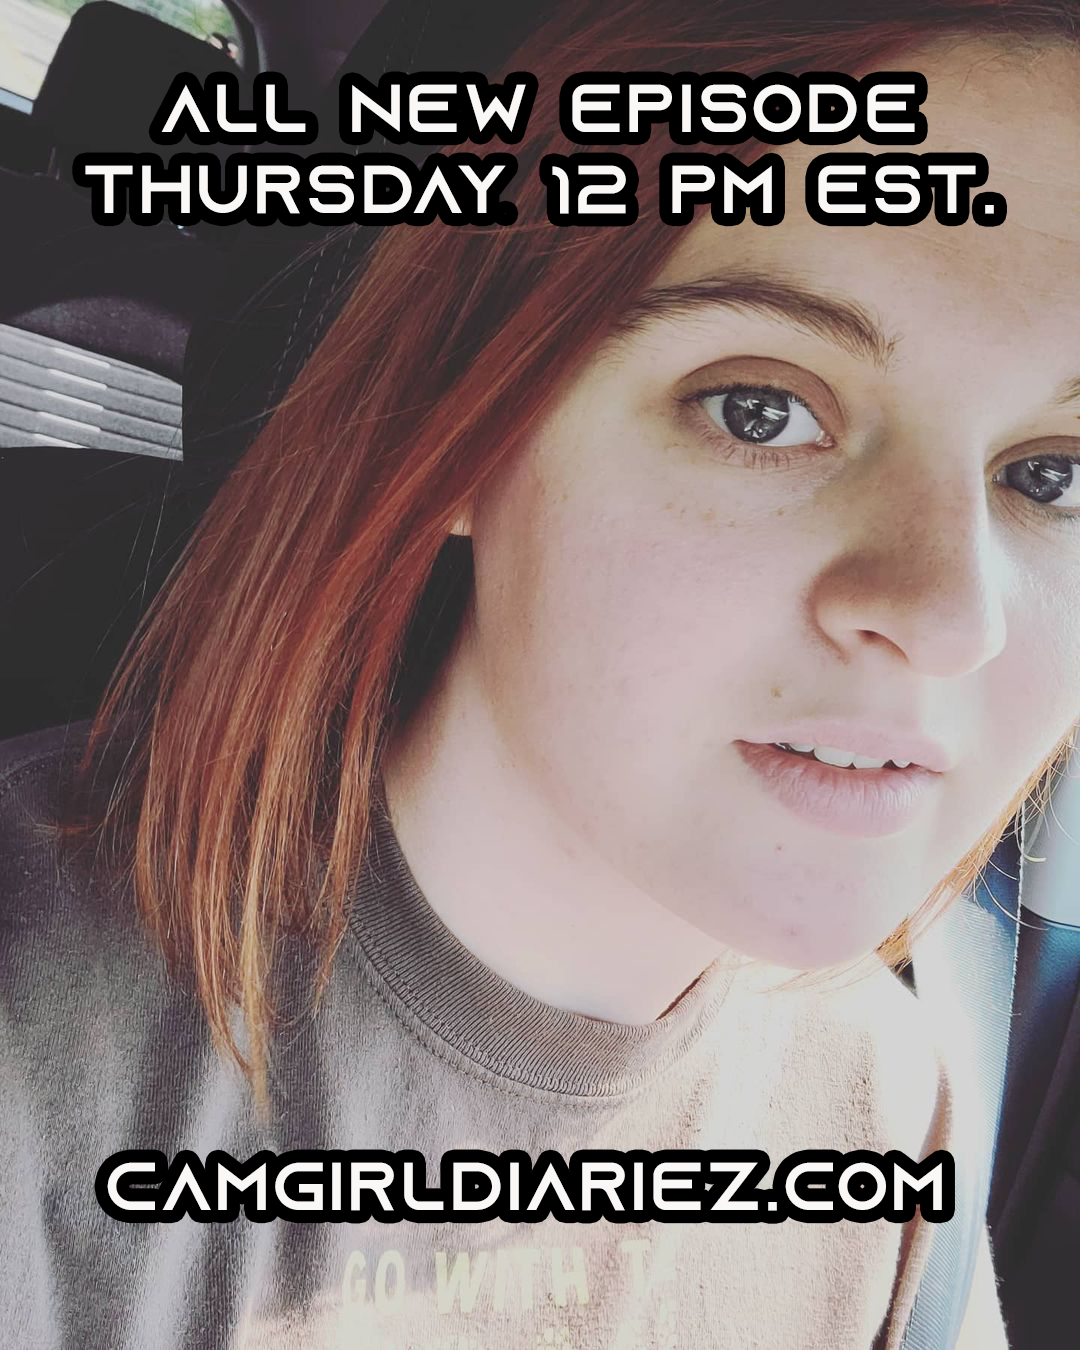 Watch the Photo by Cam Girl Podcast with the username @CamGirlDiaries, who is a brand user, posted on January 6, 2021 and the text says 'Thursdays Podcast Episode #4 features Kinky Chef! @thesexychef13 We have an amazing conversation on everything from cam girl advice to the difference between free porn vs custom content & much more! You'll be entertained and learn some things, especially..'